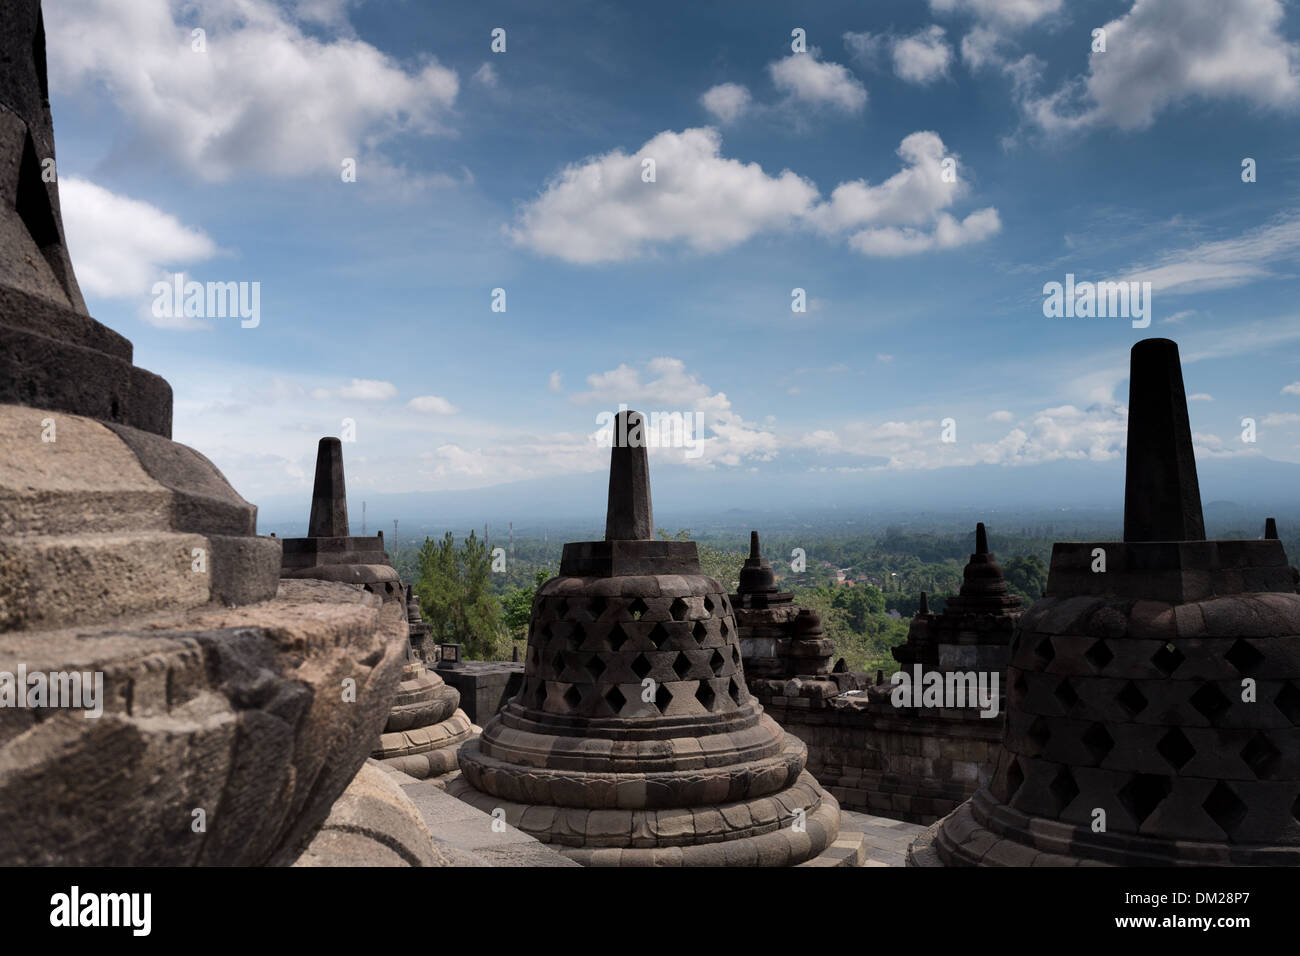 BOROBUDOR IN YOGYAKARTA INDONESIA IS THE BIGGEST BUDHA TEMPLE IN THE WORLD. A WORLD HERITAGE LIST NUMBER 592. Stock Photo